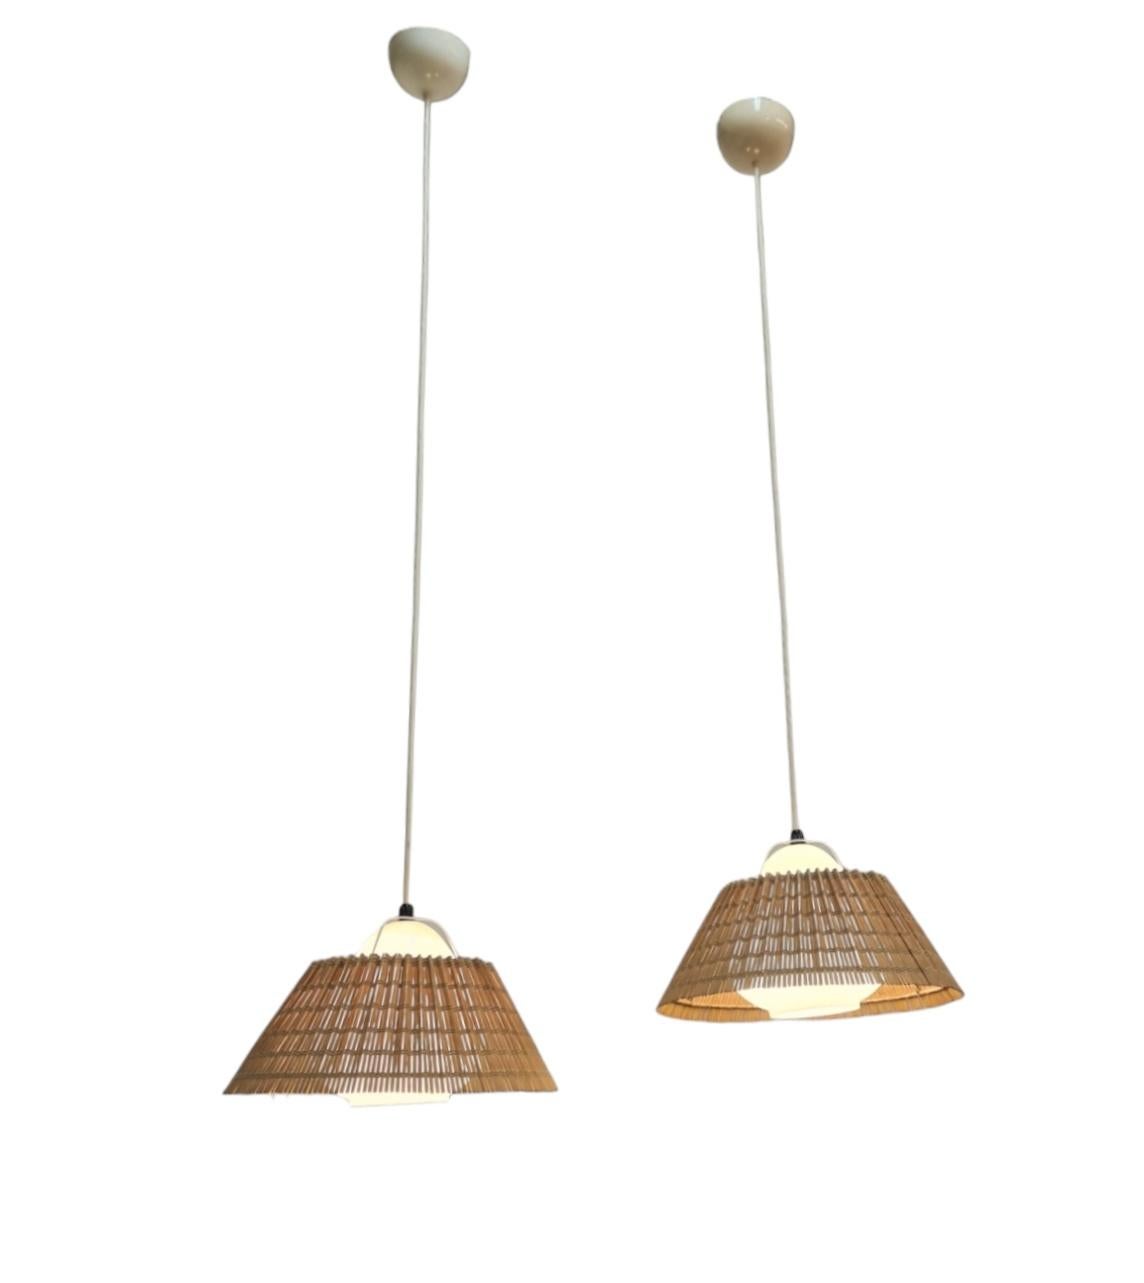 A lovely pair of Lisa Johansson-Papé ceiling lamps from the 1940s. A beautiful organic design of pear shaped mouth blown opal glass with the original rattan shade. The lamps are basically hanging freely and supported by the electric wire, so they